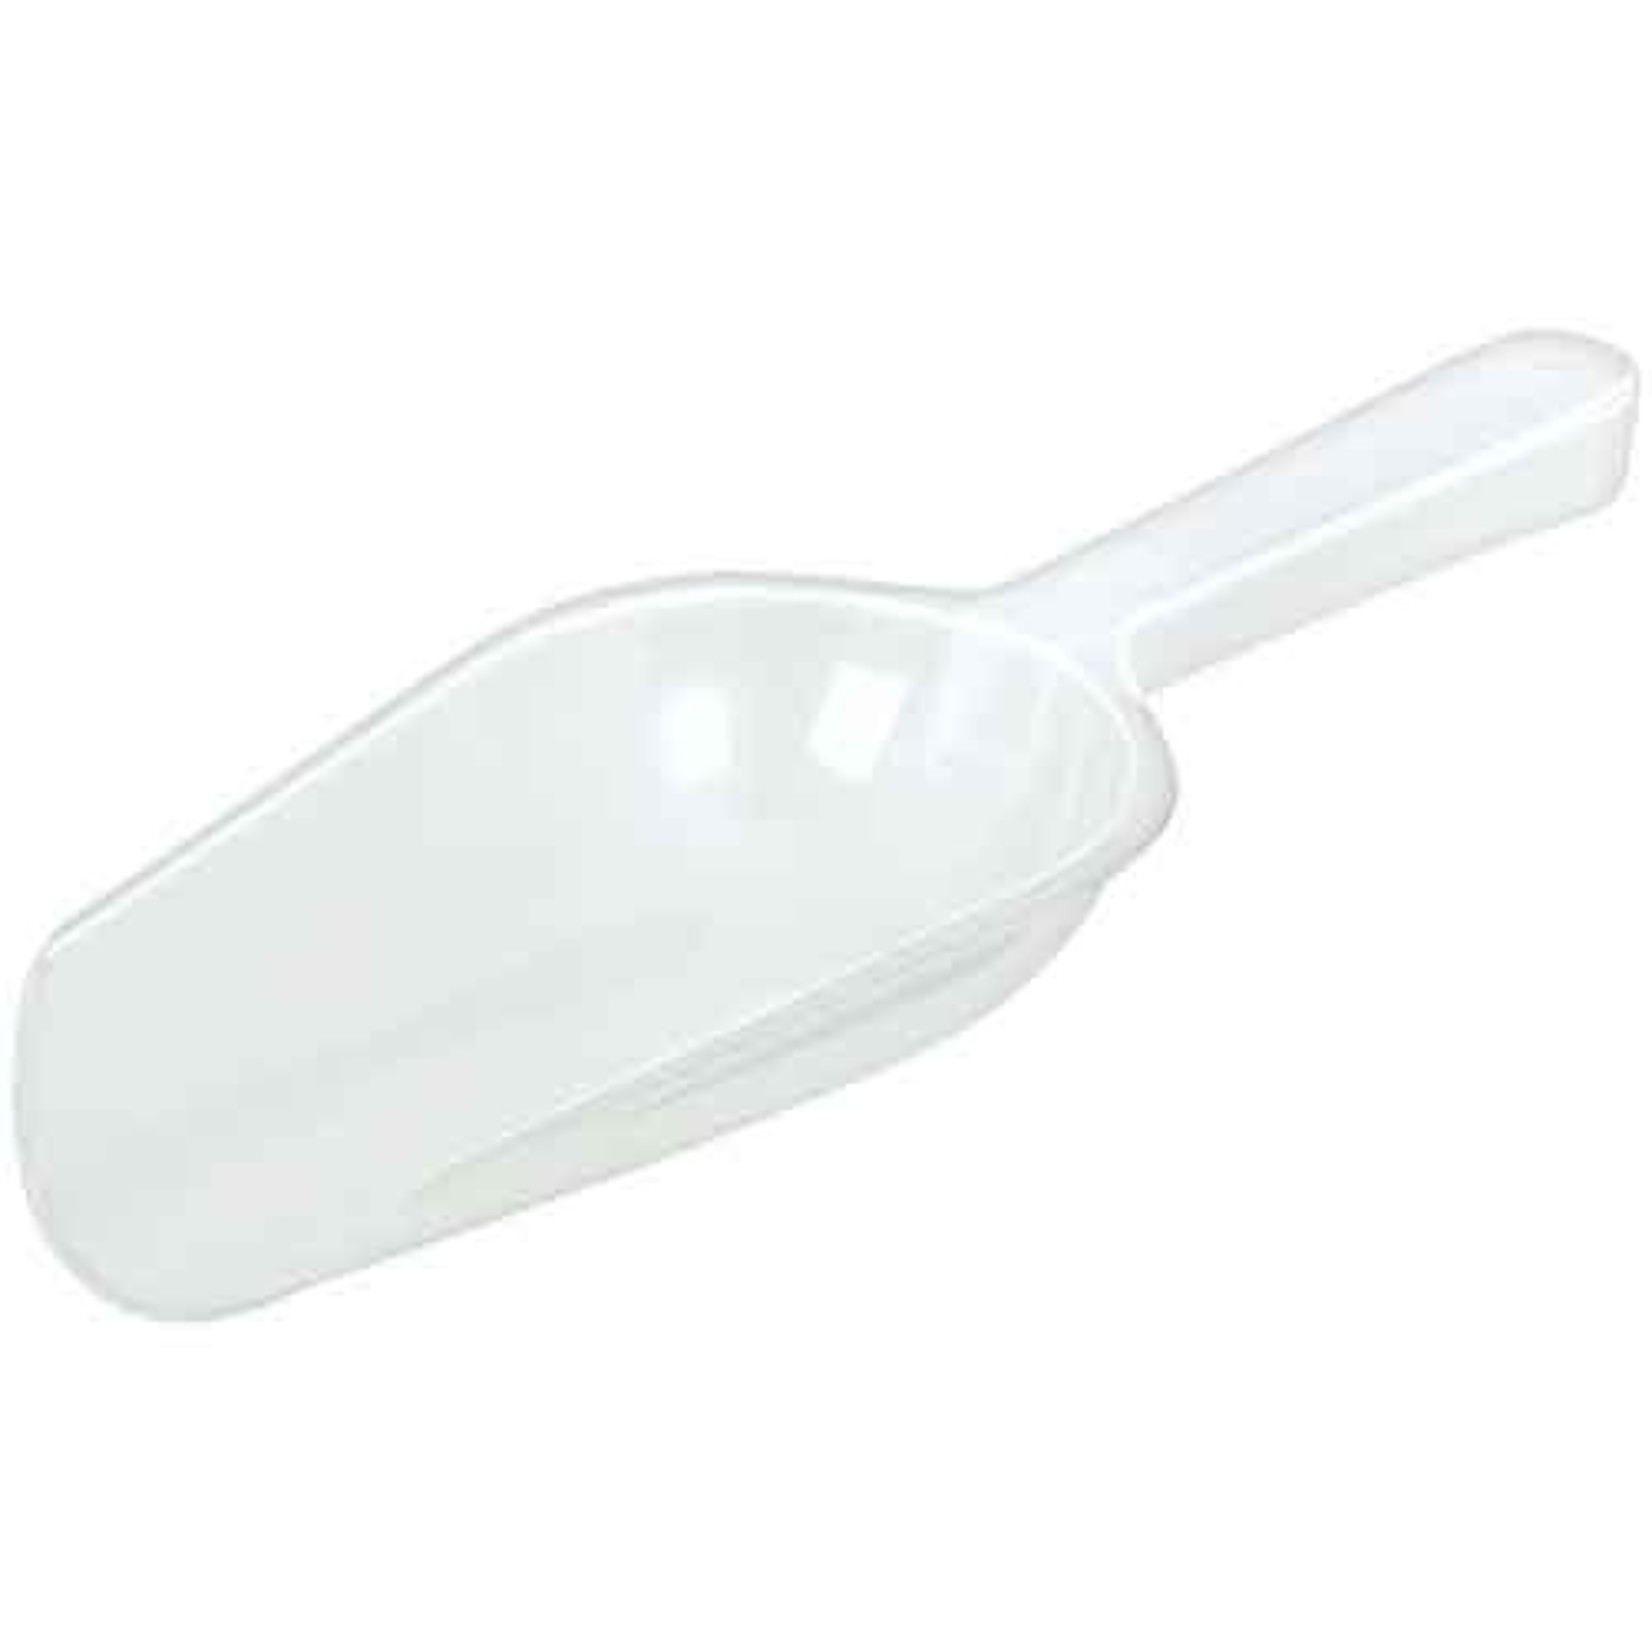 Amscan 9" Clear Ice Scooper - 1ct.